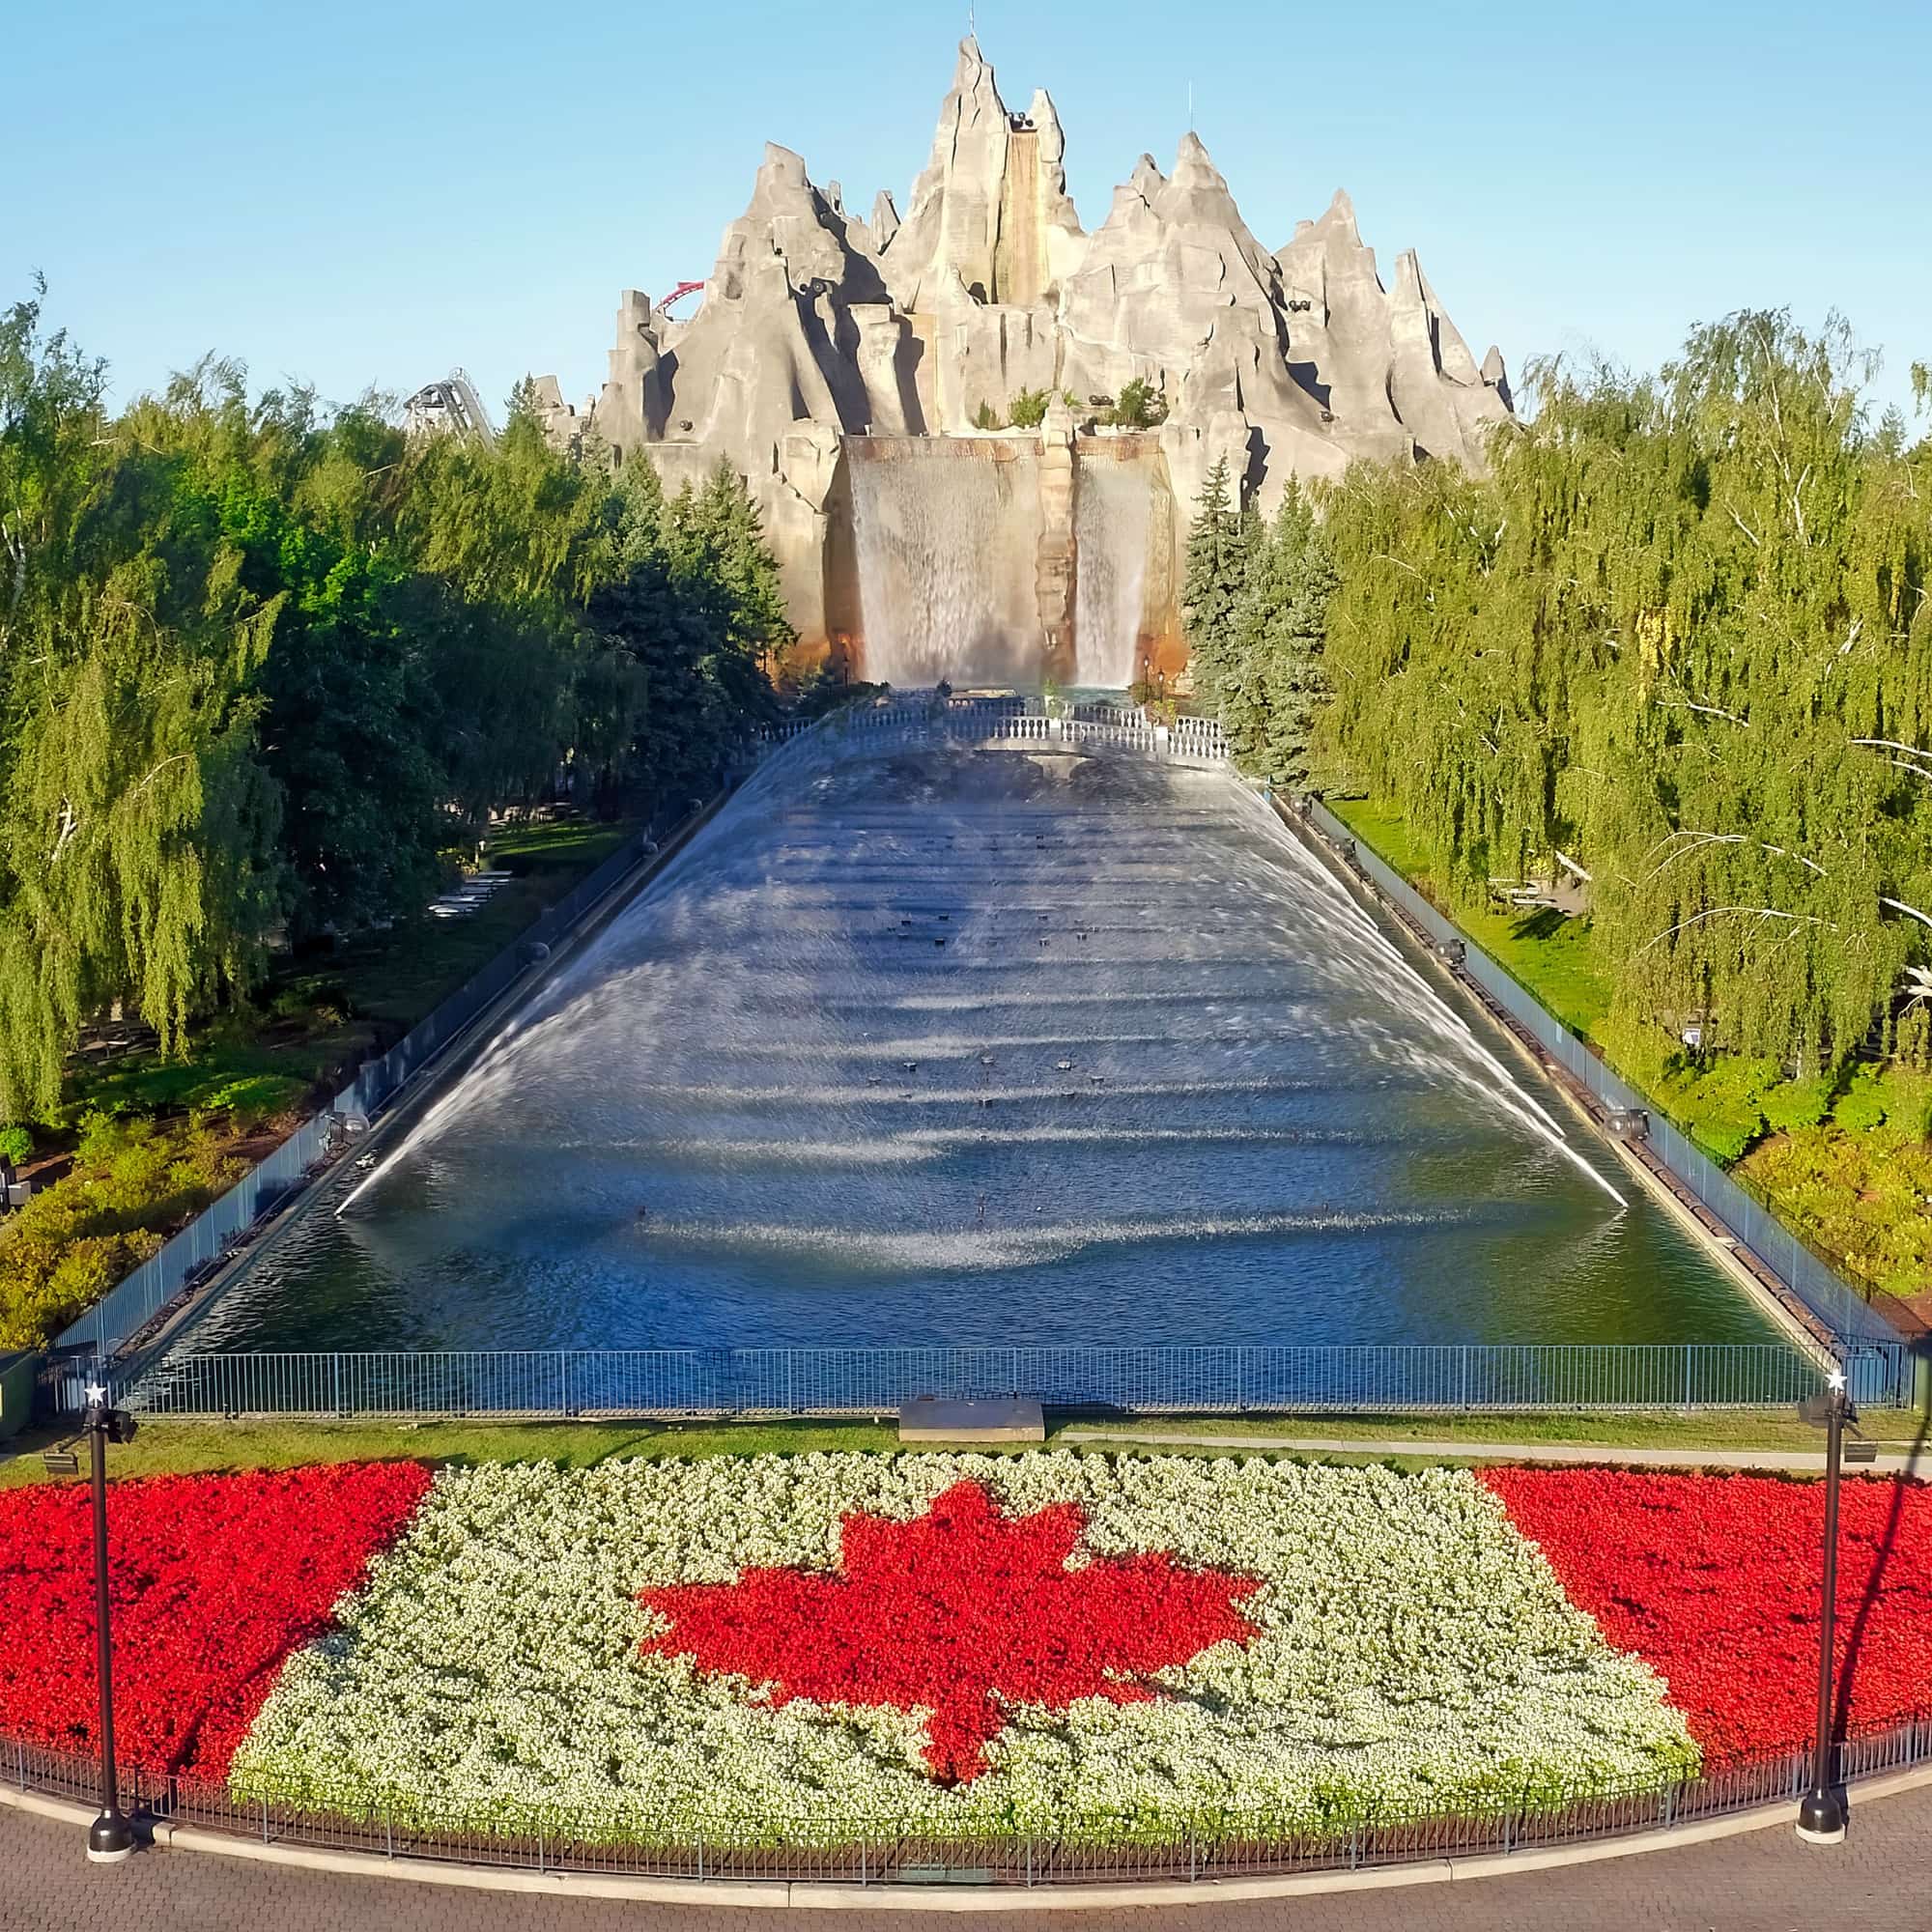 Tips for Visiting Canada’s Wonderland Theme Park